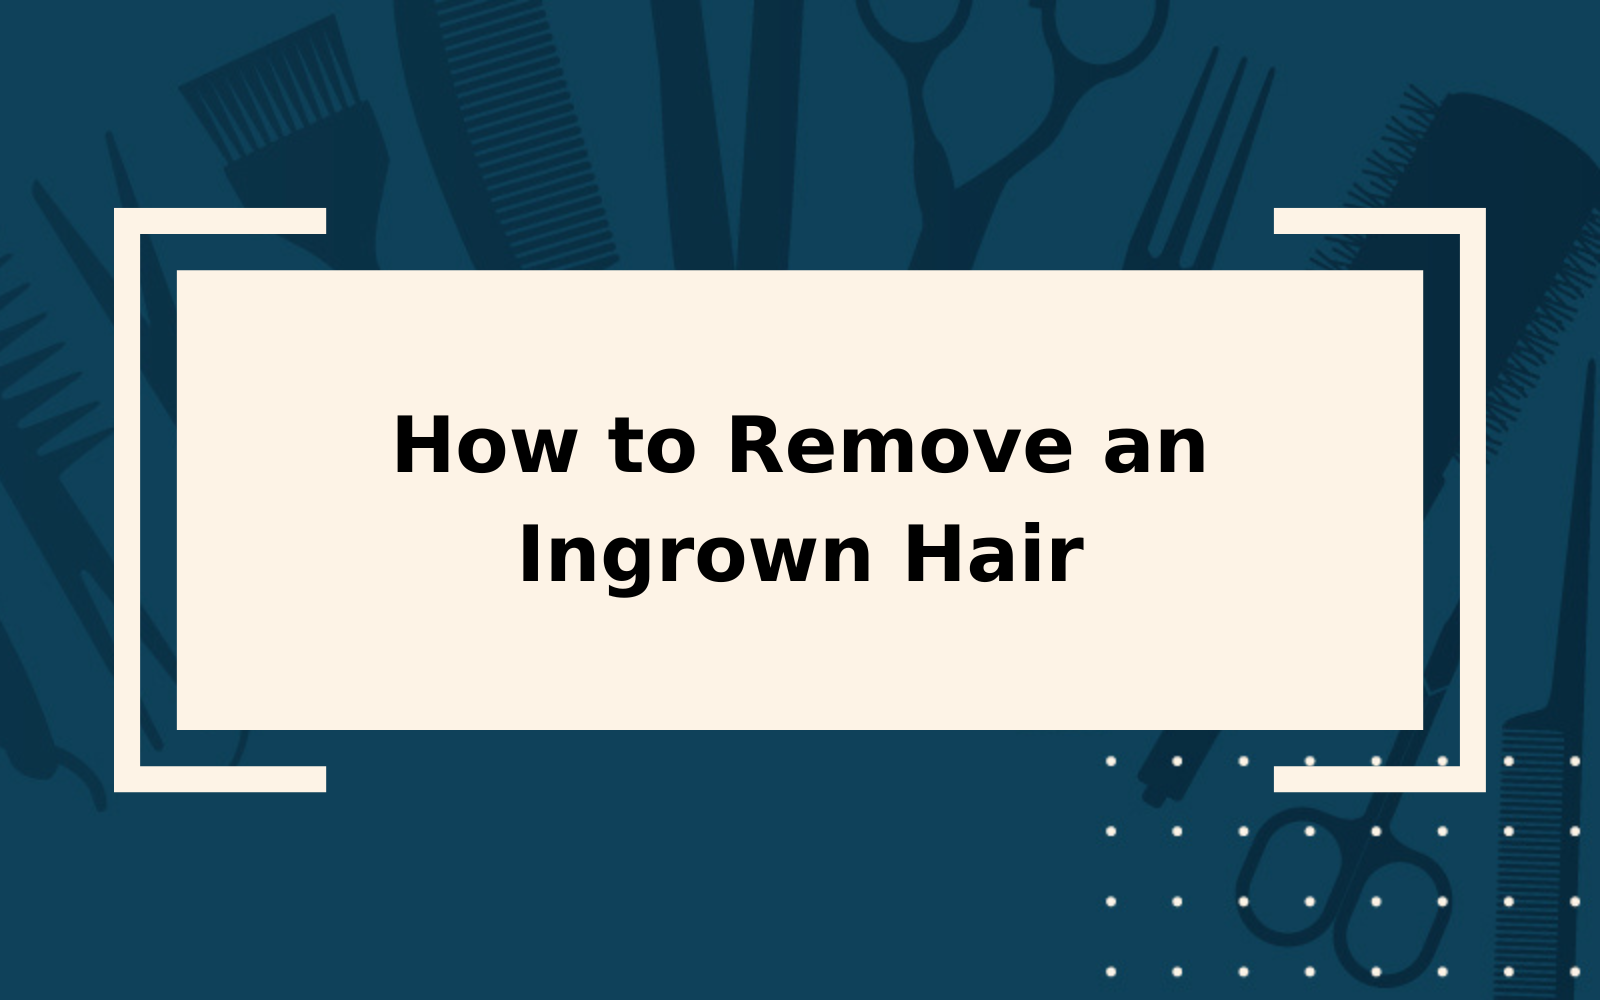 How to Remove an Ingrown Hair | Step-by-Step Guide